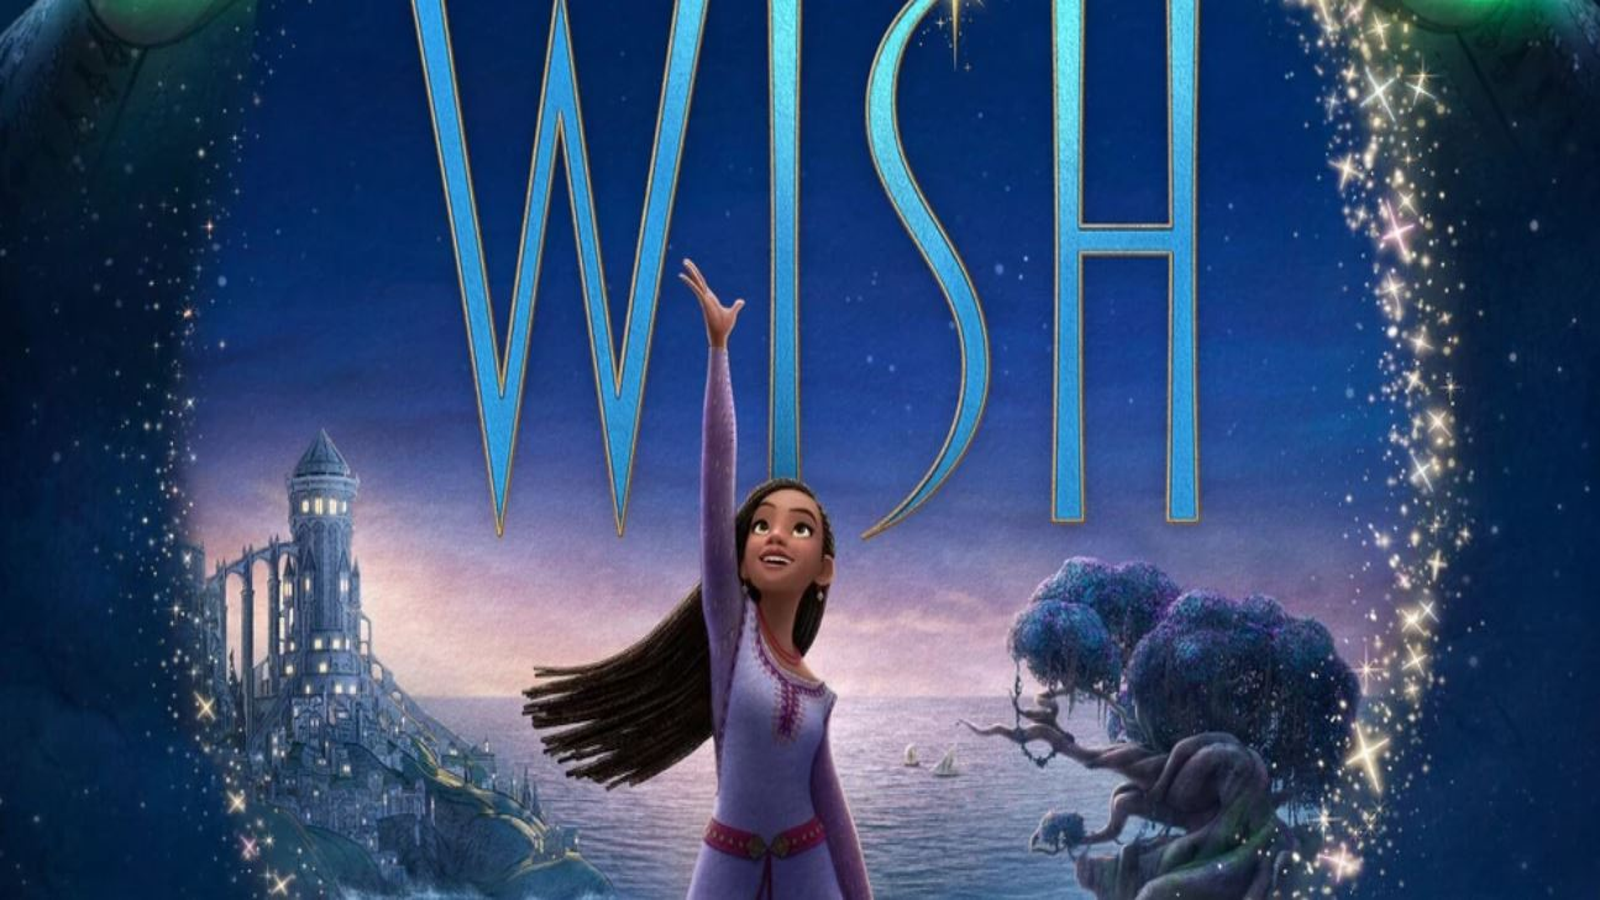 Disney's Wish: The songs, the posters, release date, cast, and